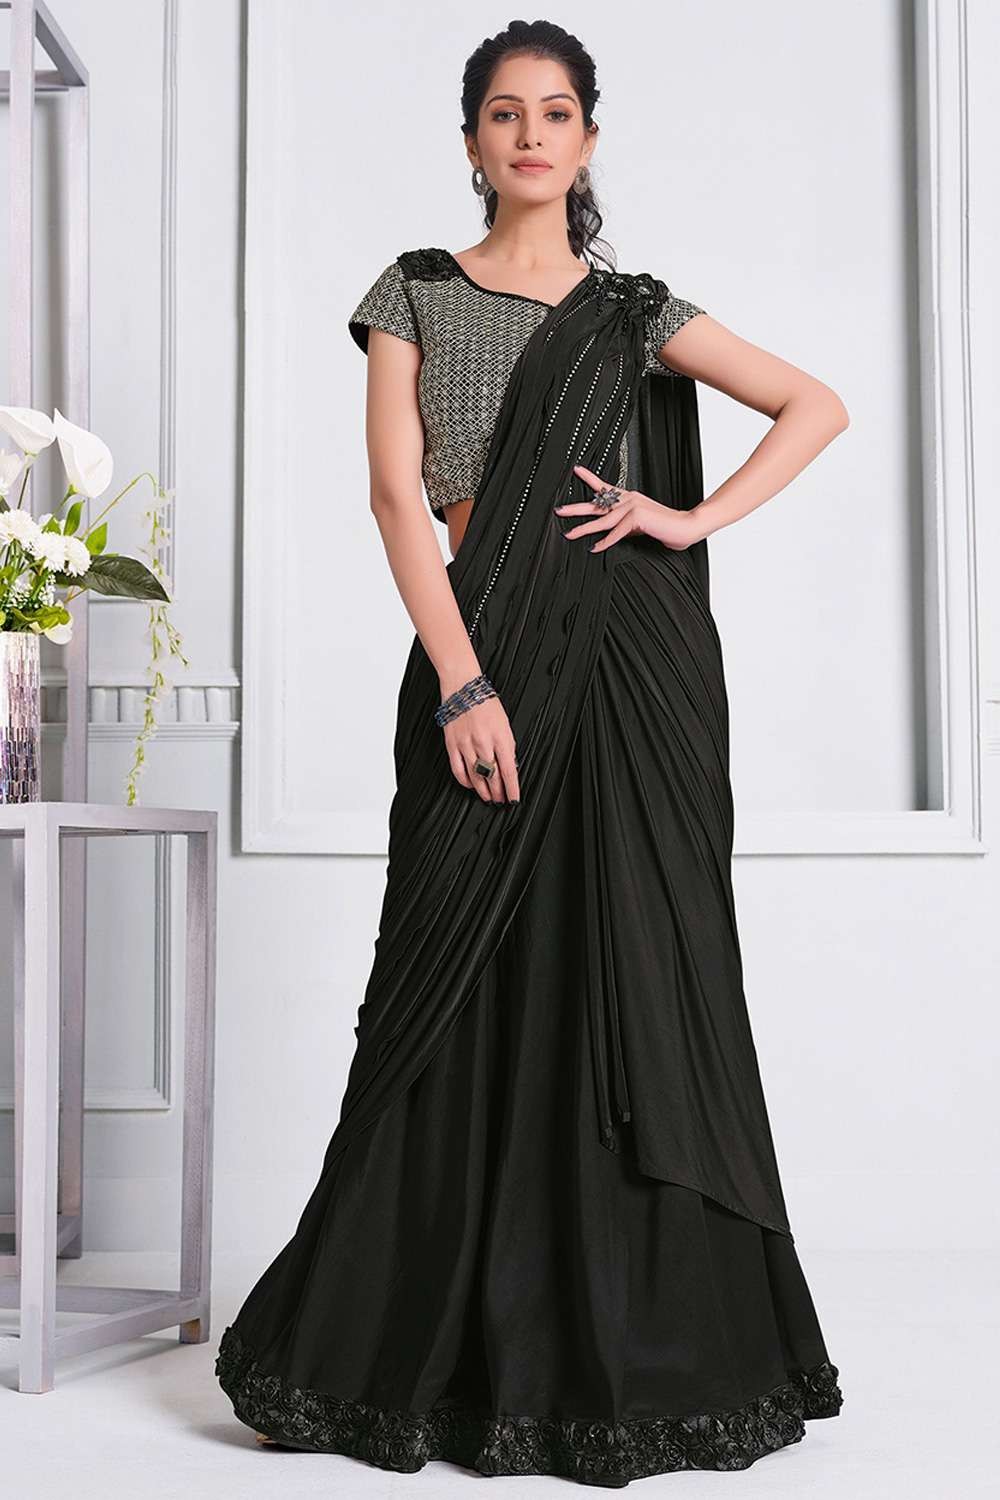 Black Party Wear Imported Lycra Saree, 6.3 m, With blouse piece at